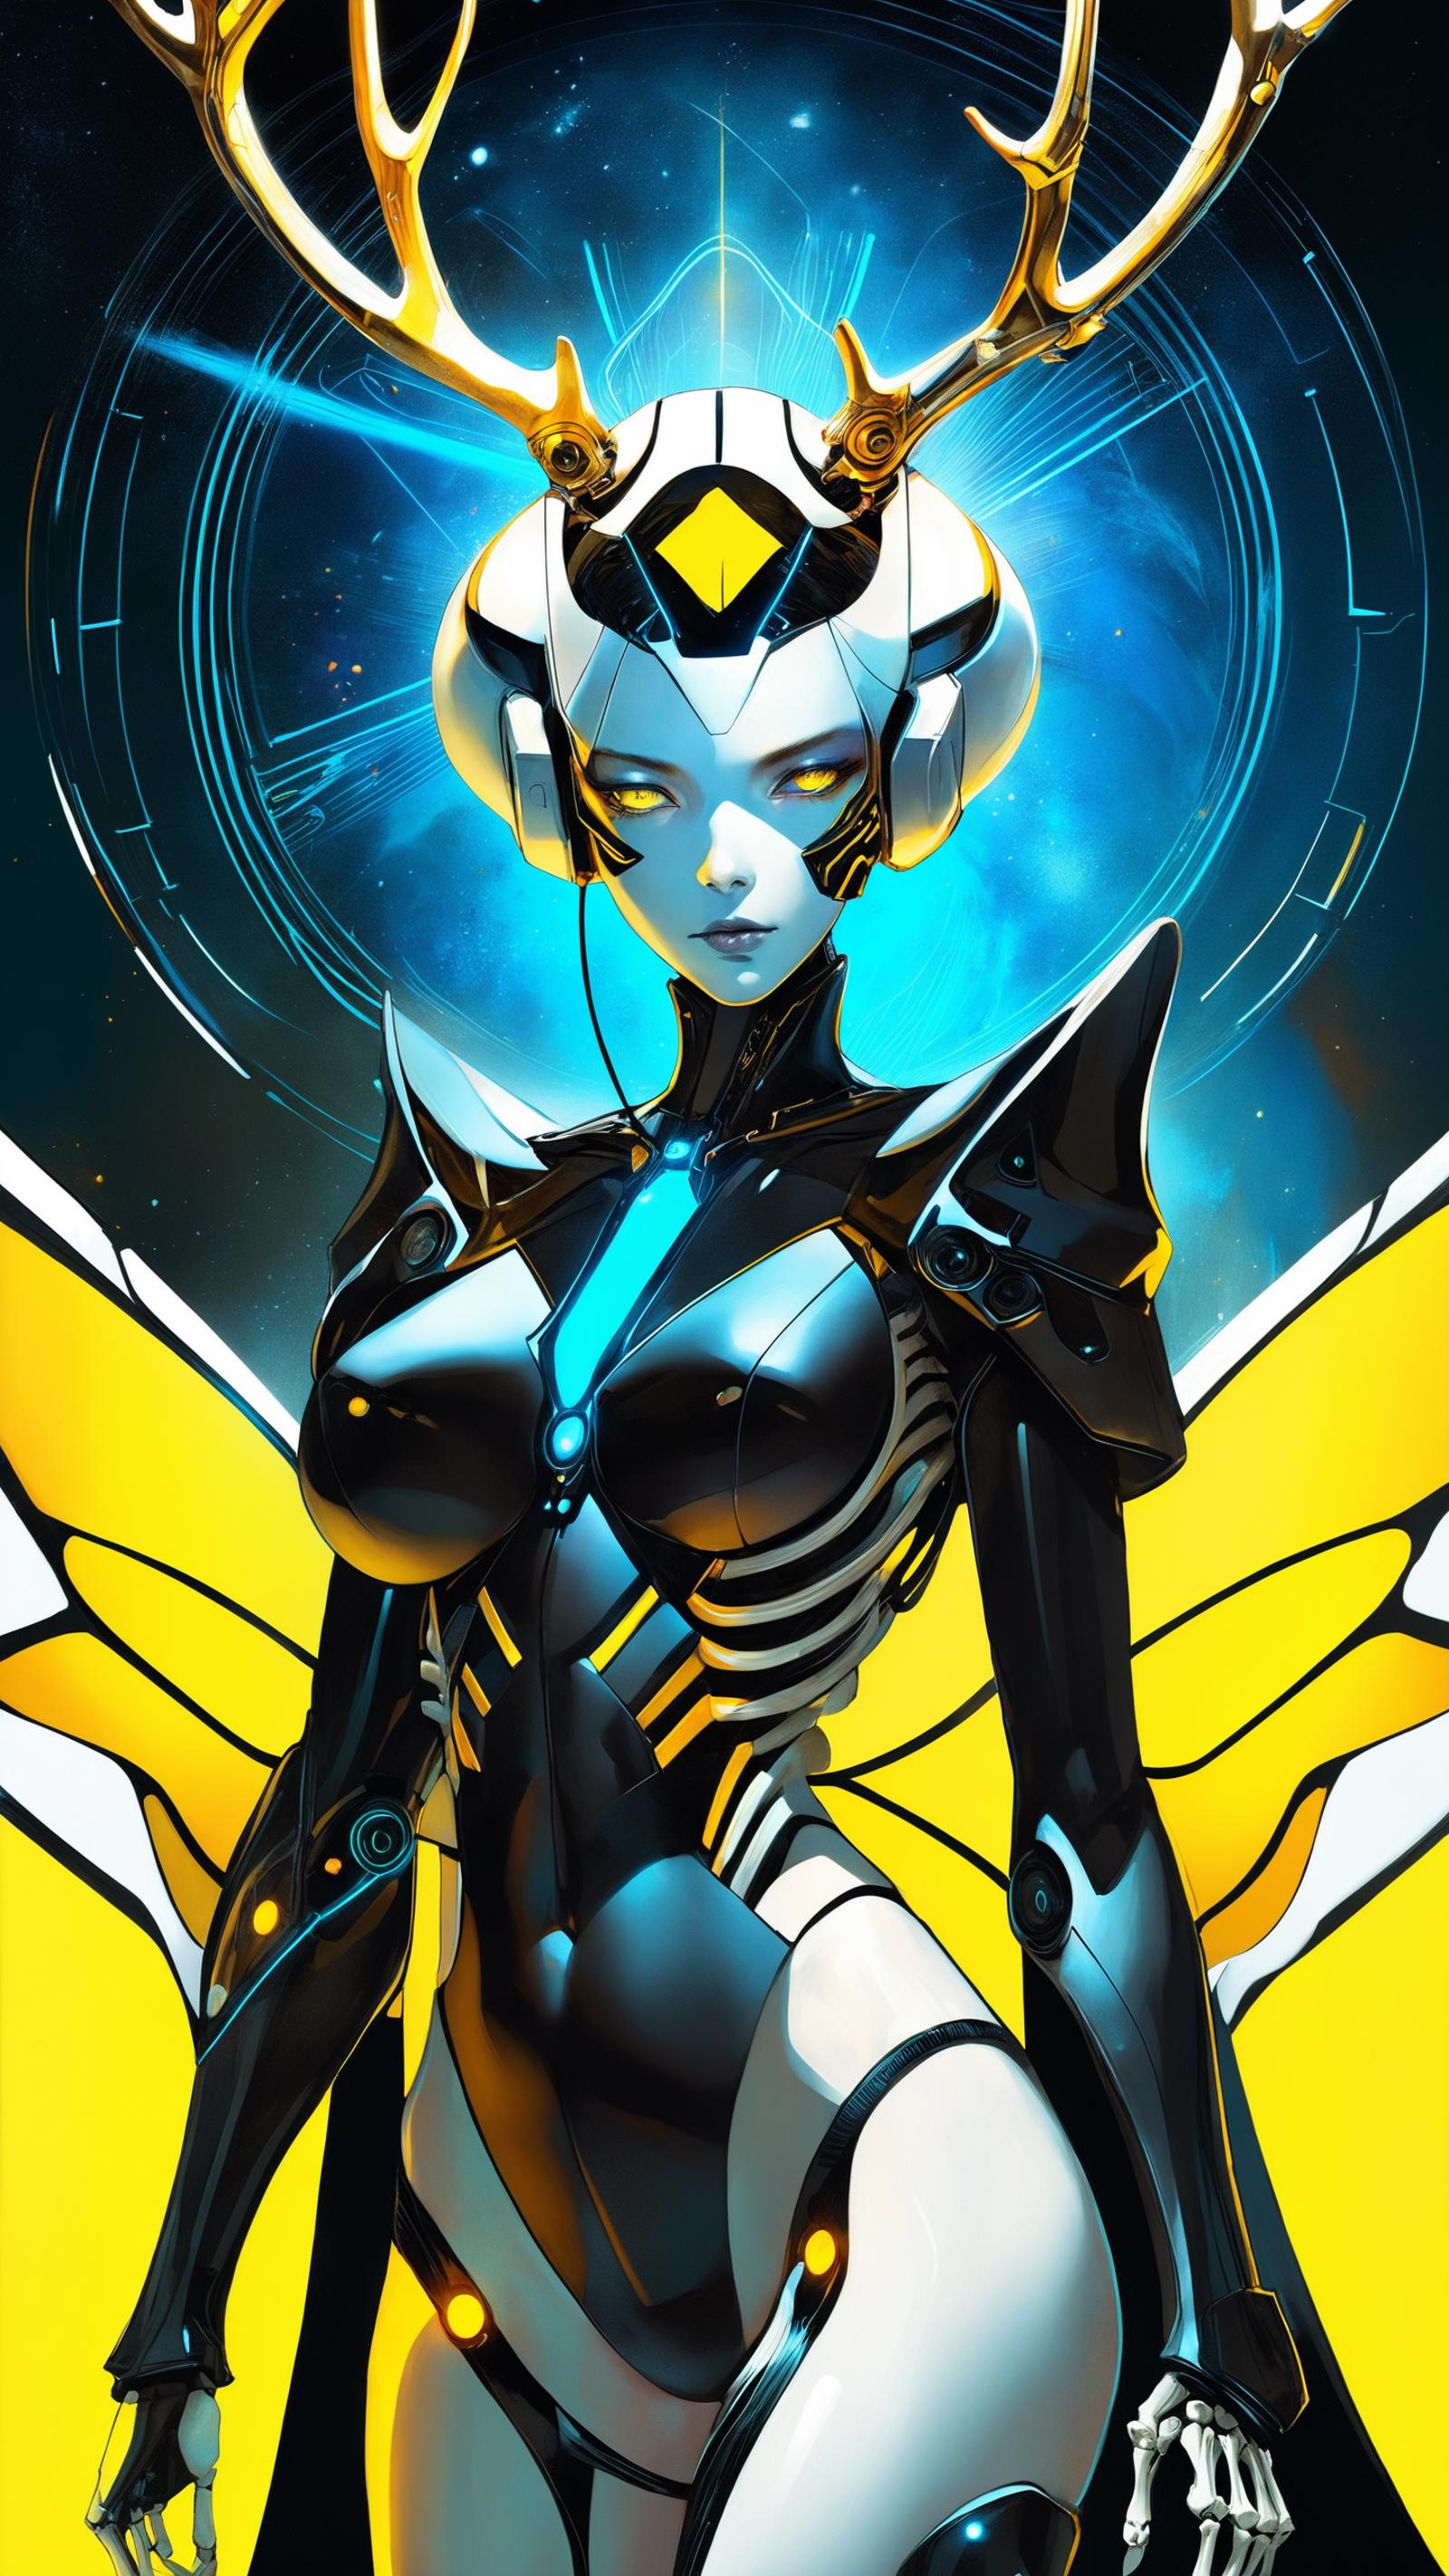 A futuristic woman with blue eyes and a robotic head wearing a black and yellow outfit.